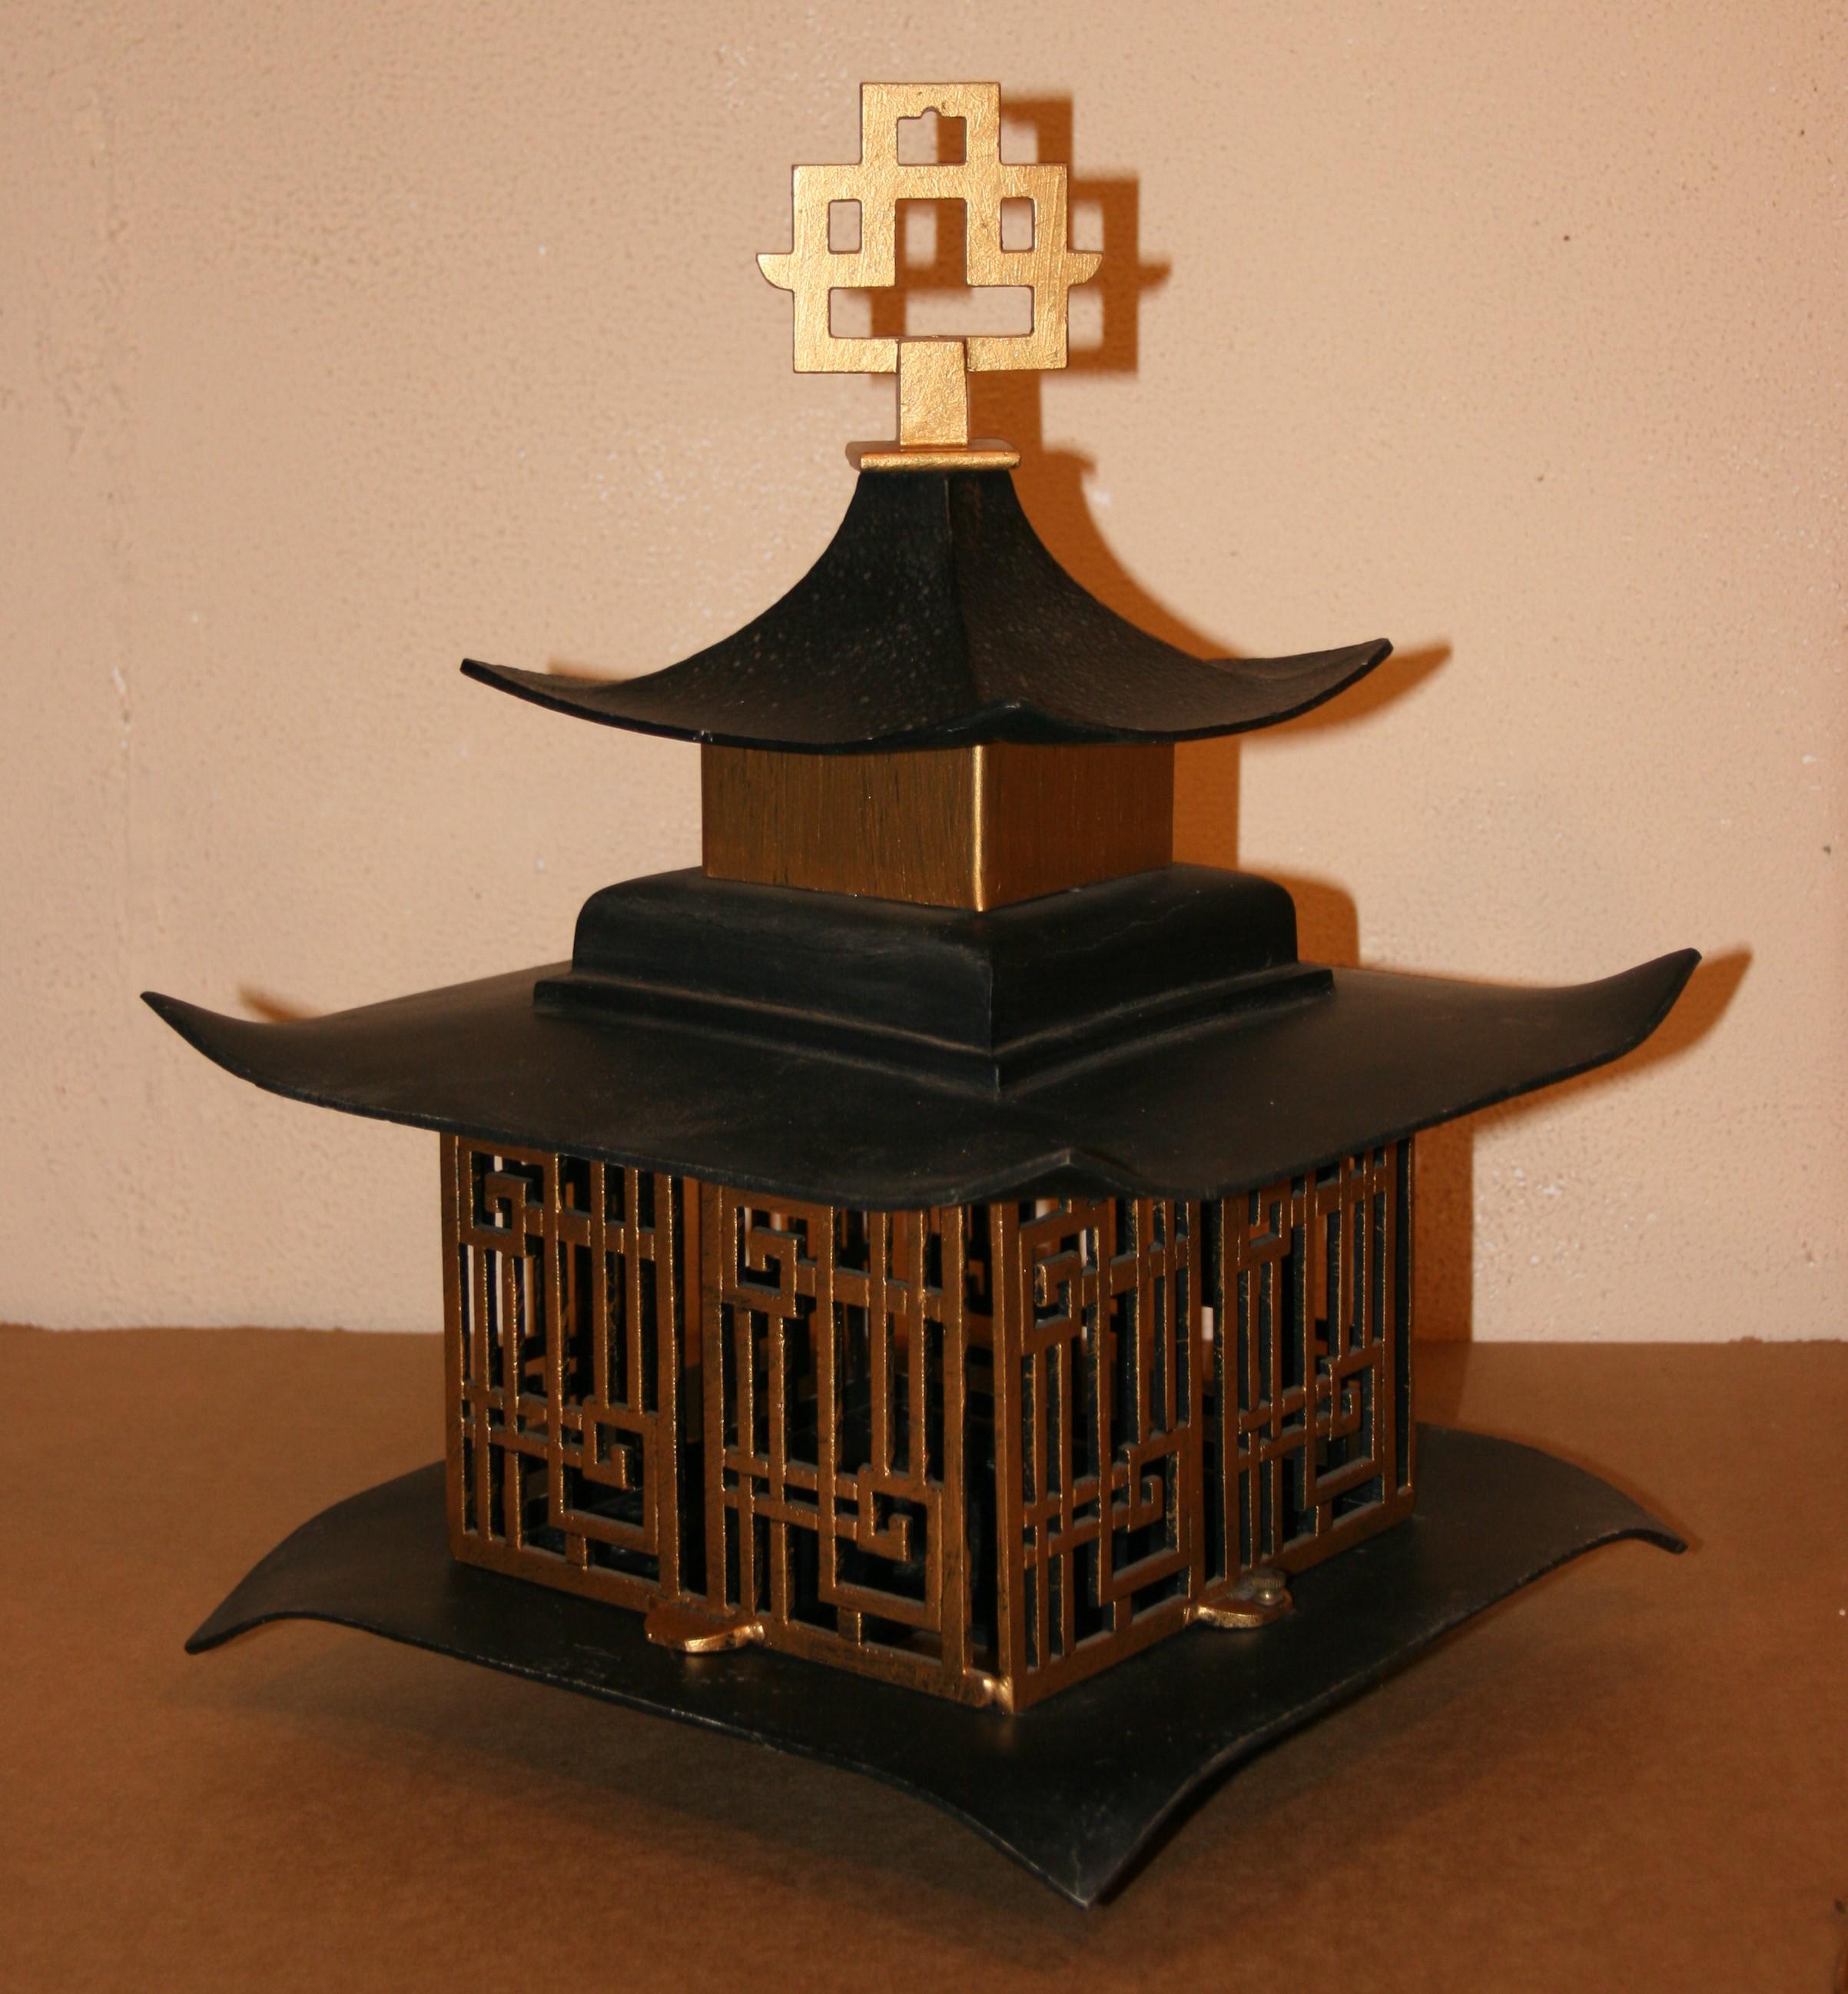 Japanese black and gold pagoda lantern
Rewired supplied with chain and canopy
Takes on 100 watt Edison based bulb.
 